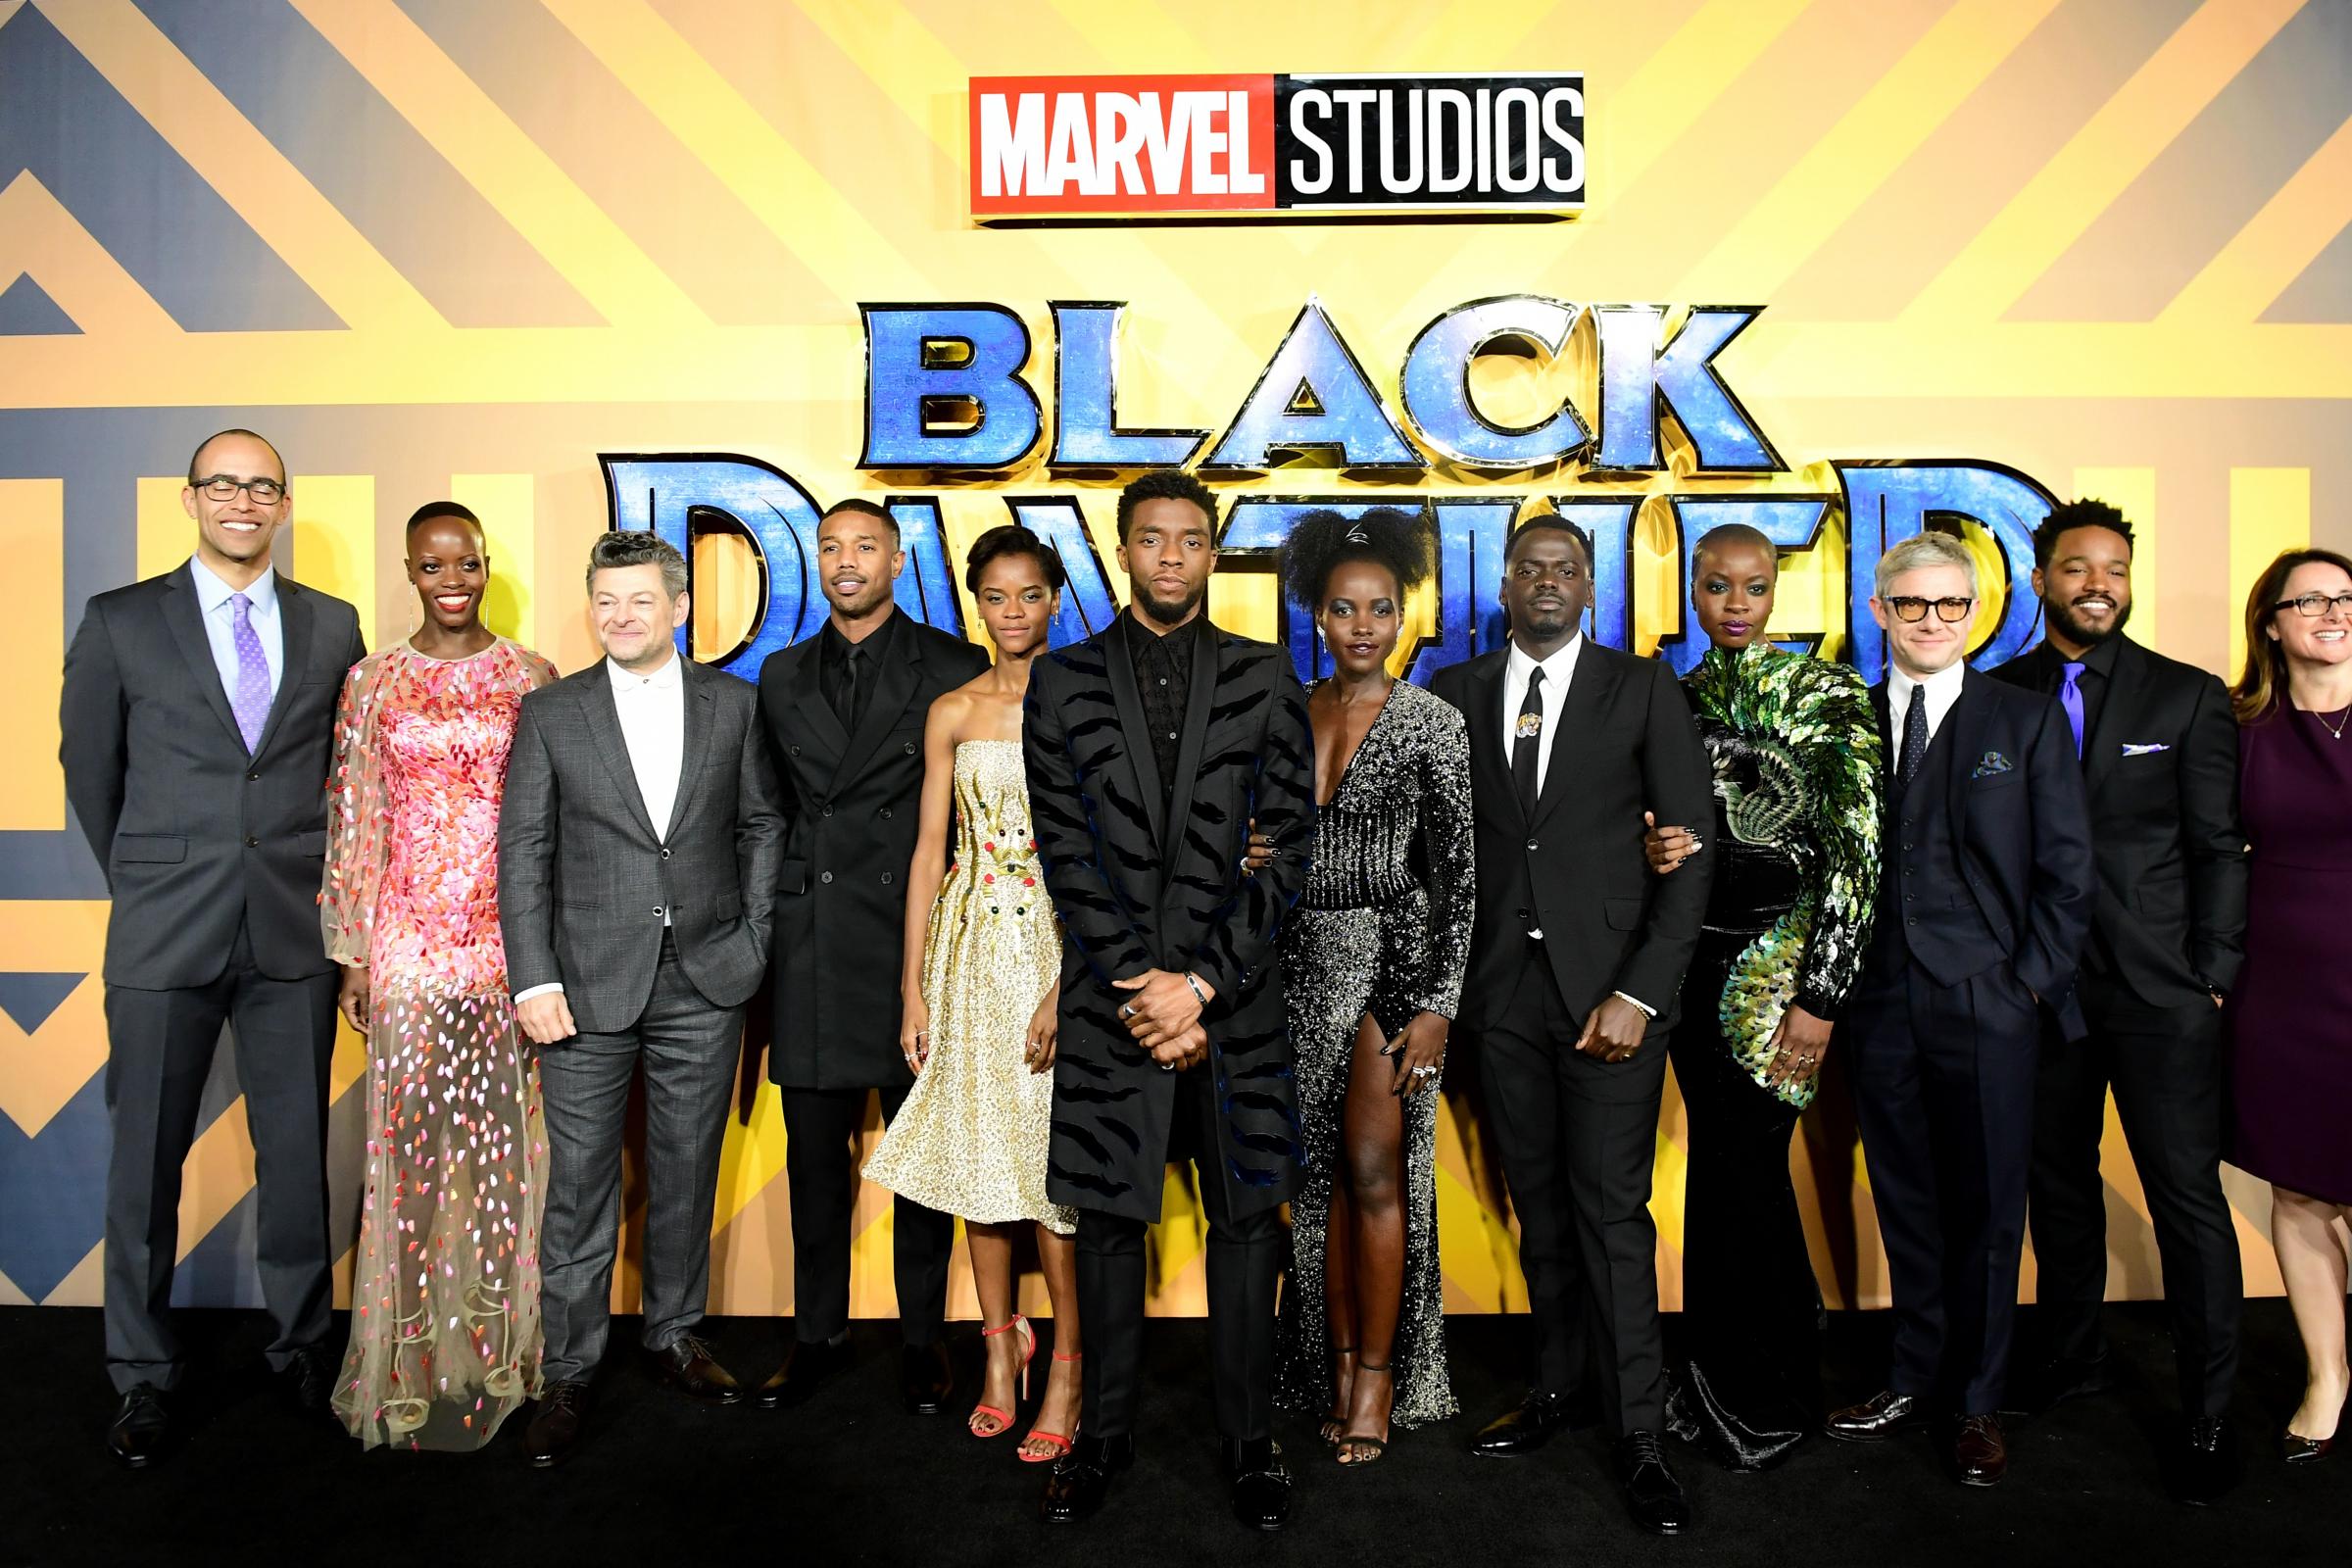 Golden Globes: Black Panther leads diversity charge but female directors snubbed